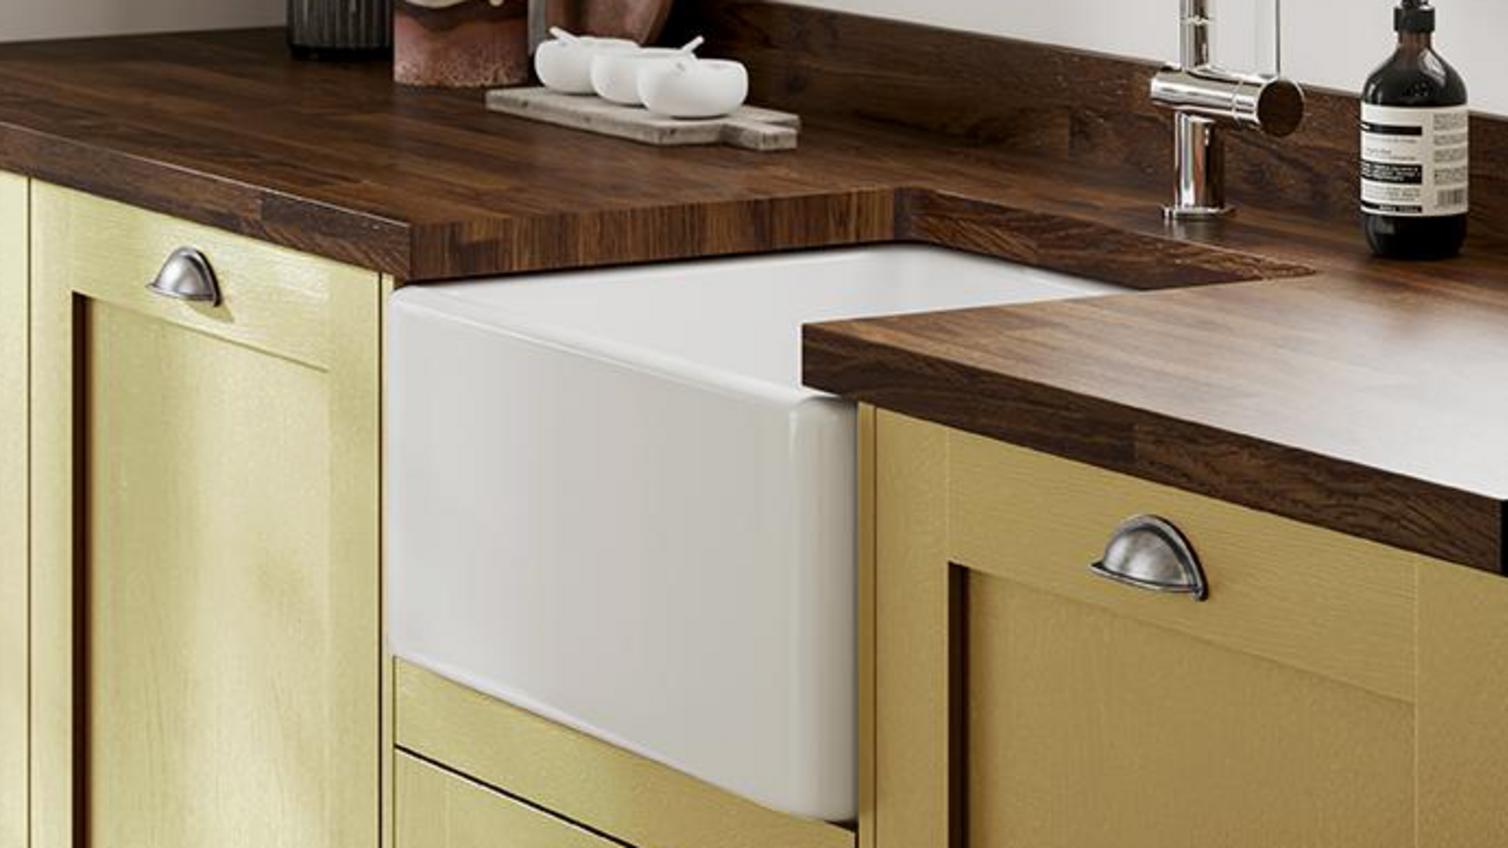 A mustard yellow kitchen using Chilcomb Paintable, styled with wooden worktops, a ceramic sink and cabinet cup handles.